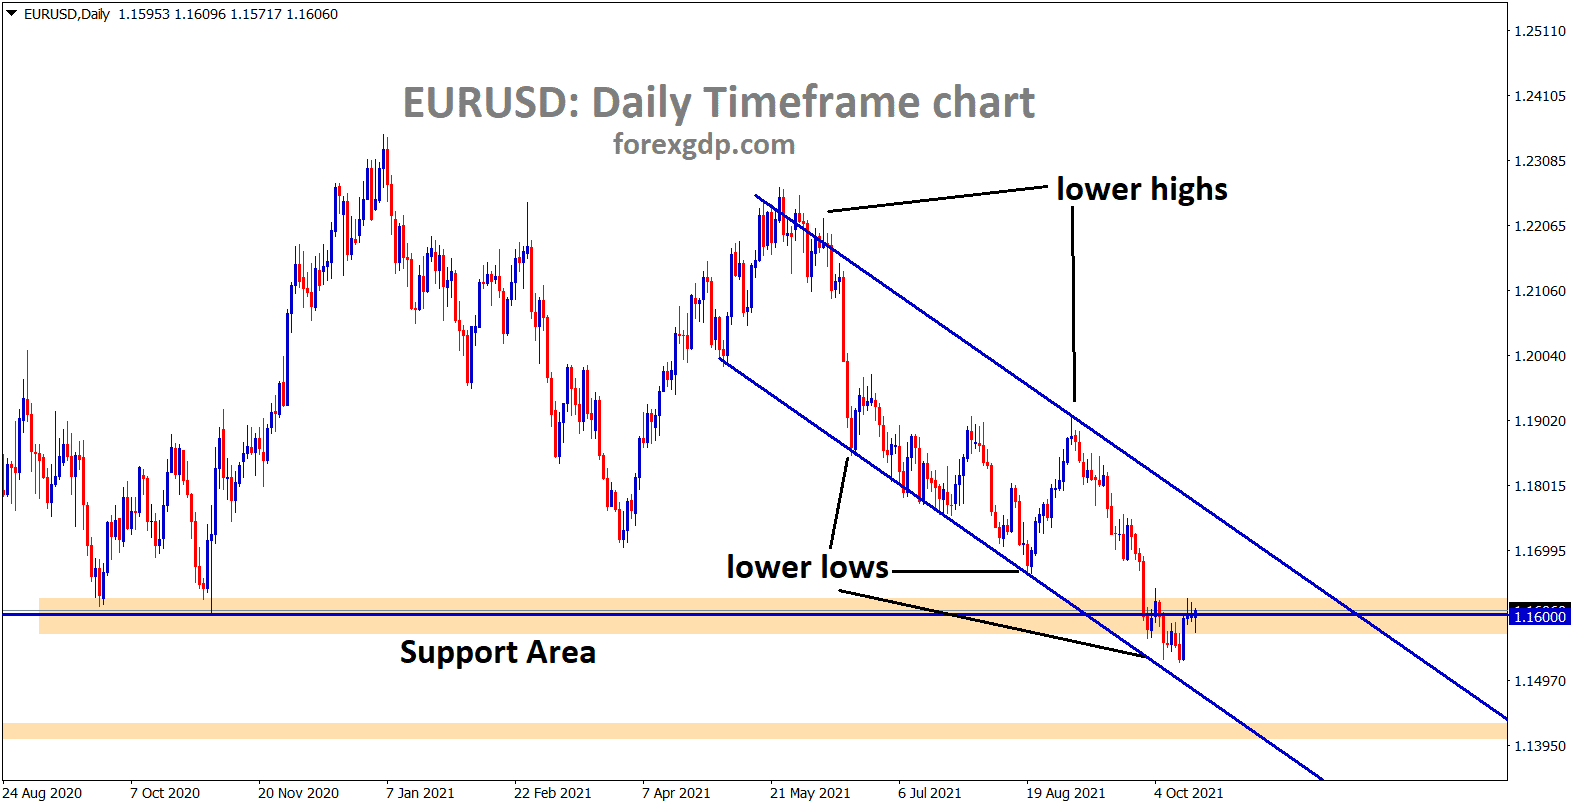 EURUSD is rebounding from the lower low level of the descending channel and the support area